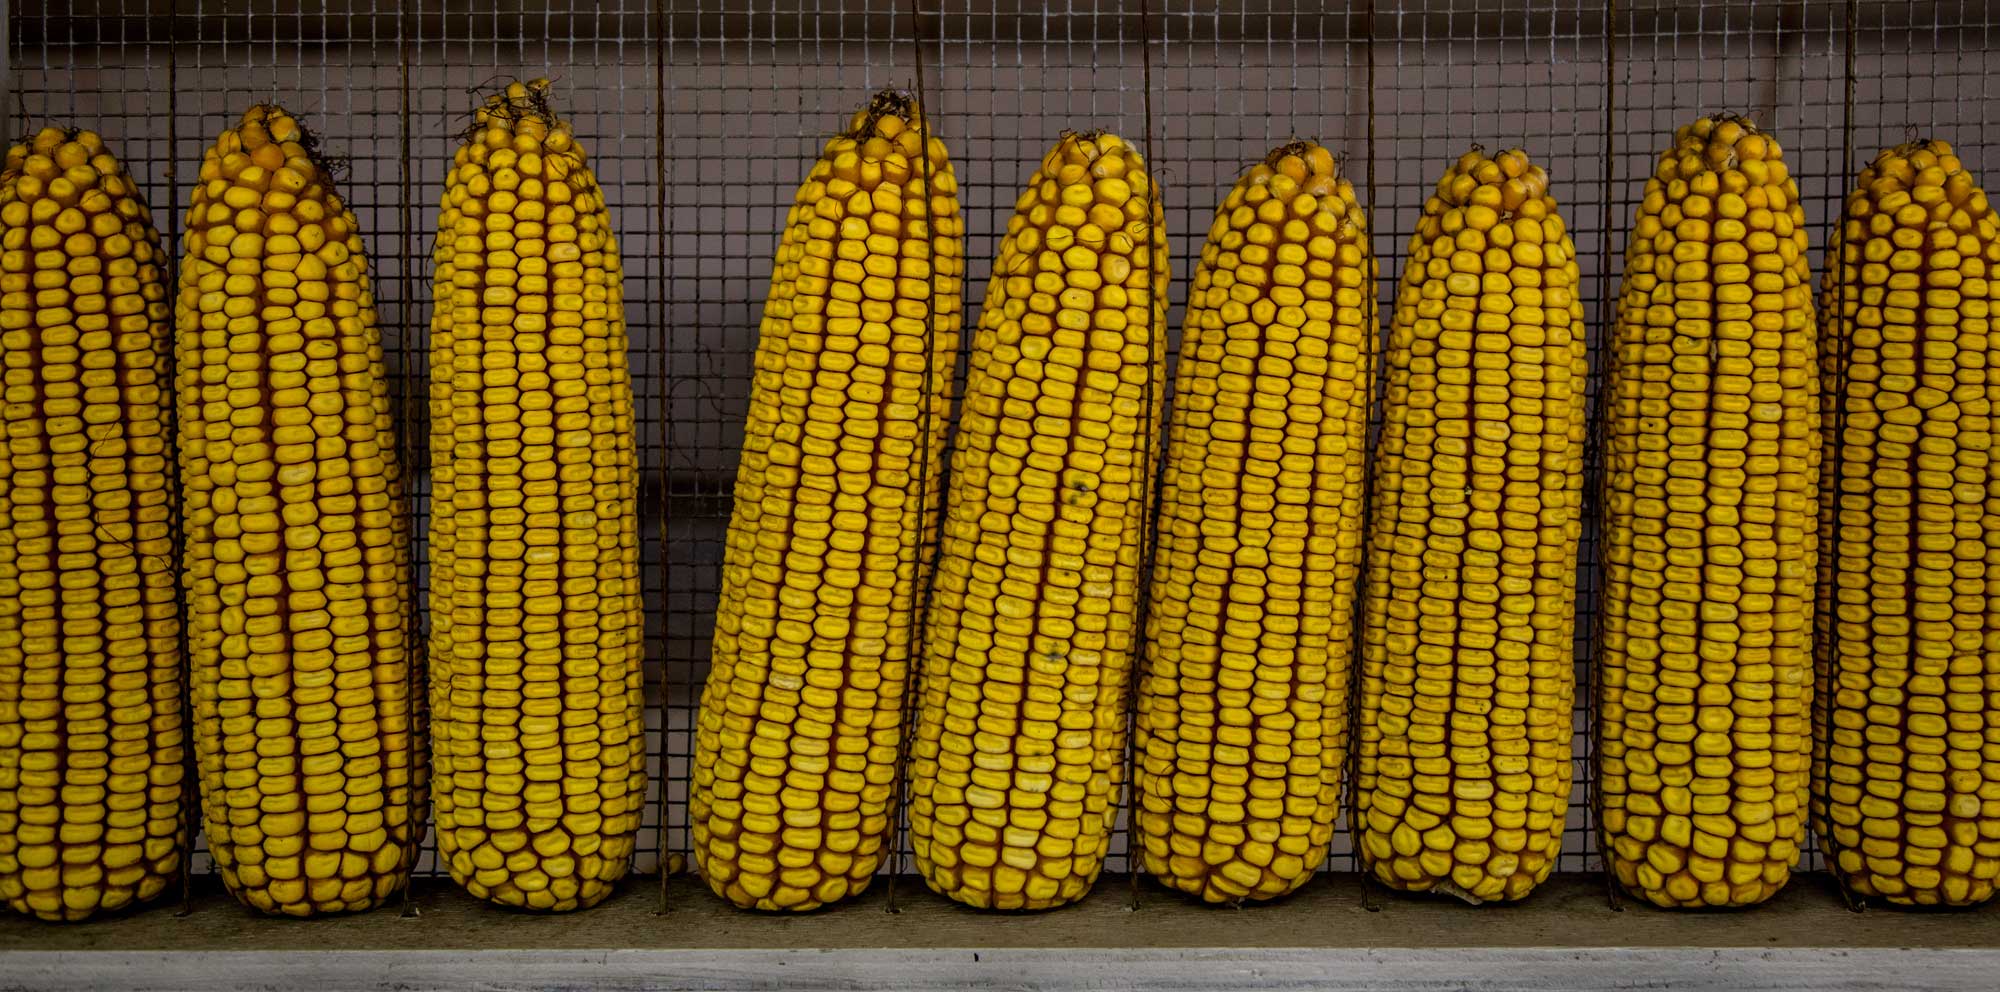 Photograph of ears of yellow dent corn. The photo shows a row of ears of yellow dent corn, with the tops of the ear pointed upward. Each kernel on each ear has a noticeable dent on its upper surface. 